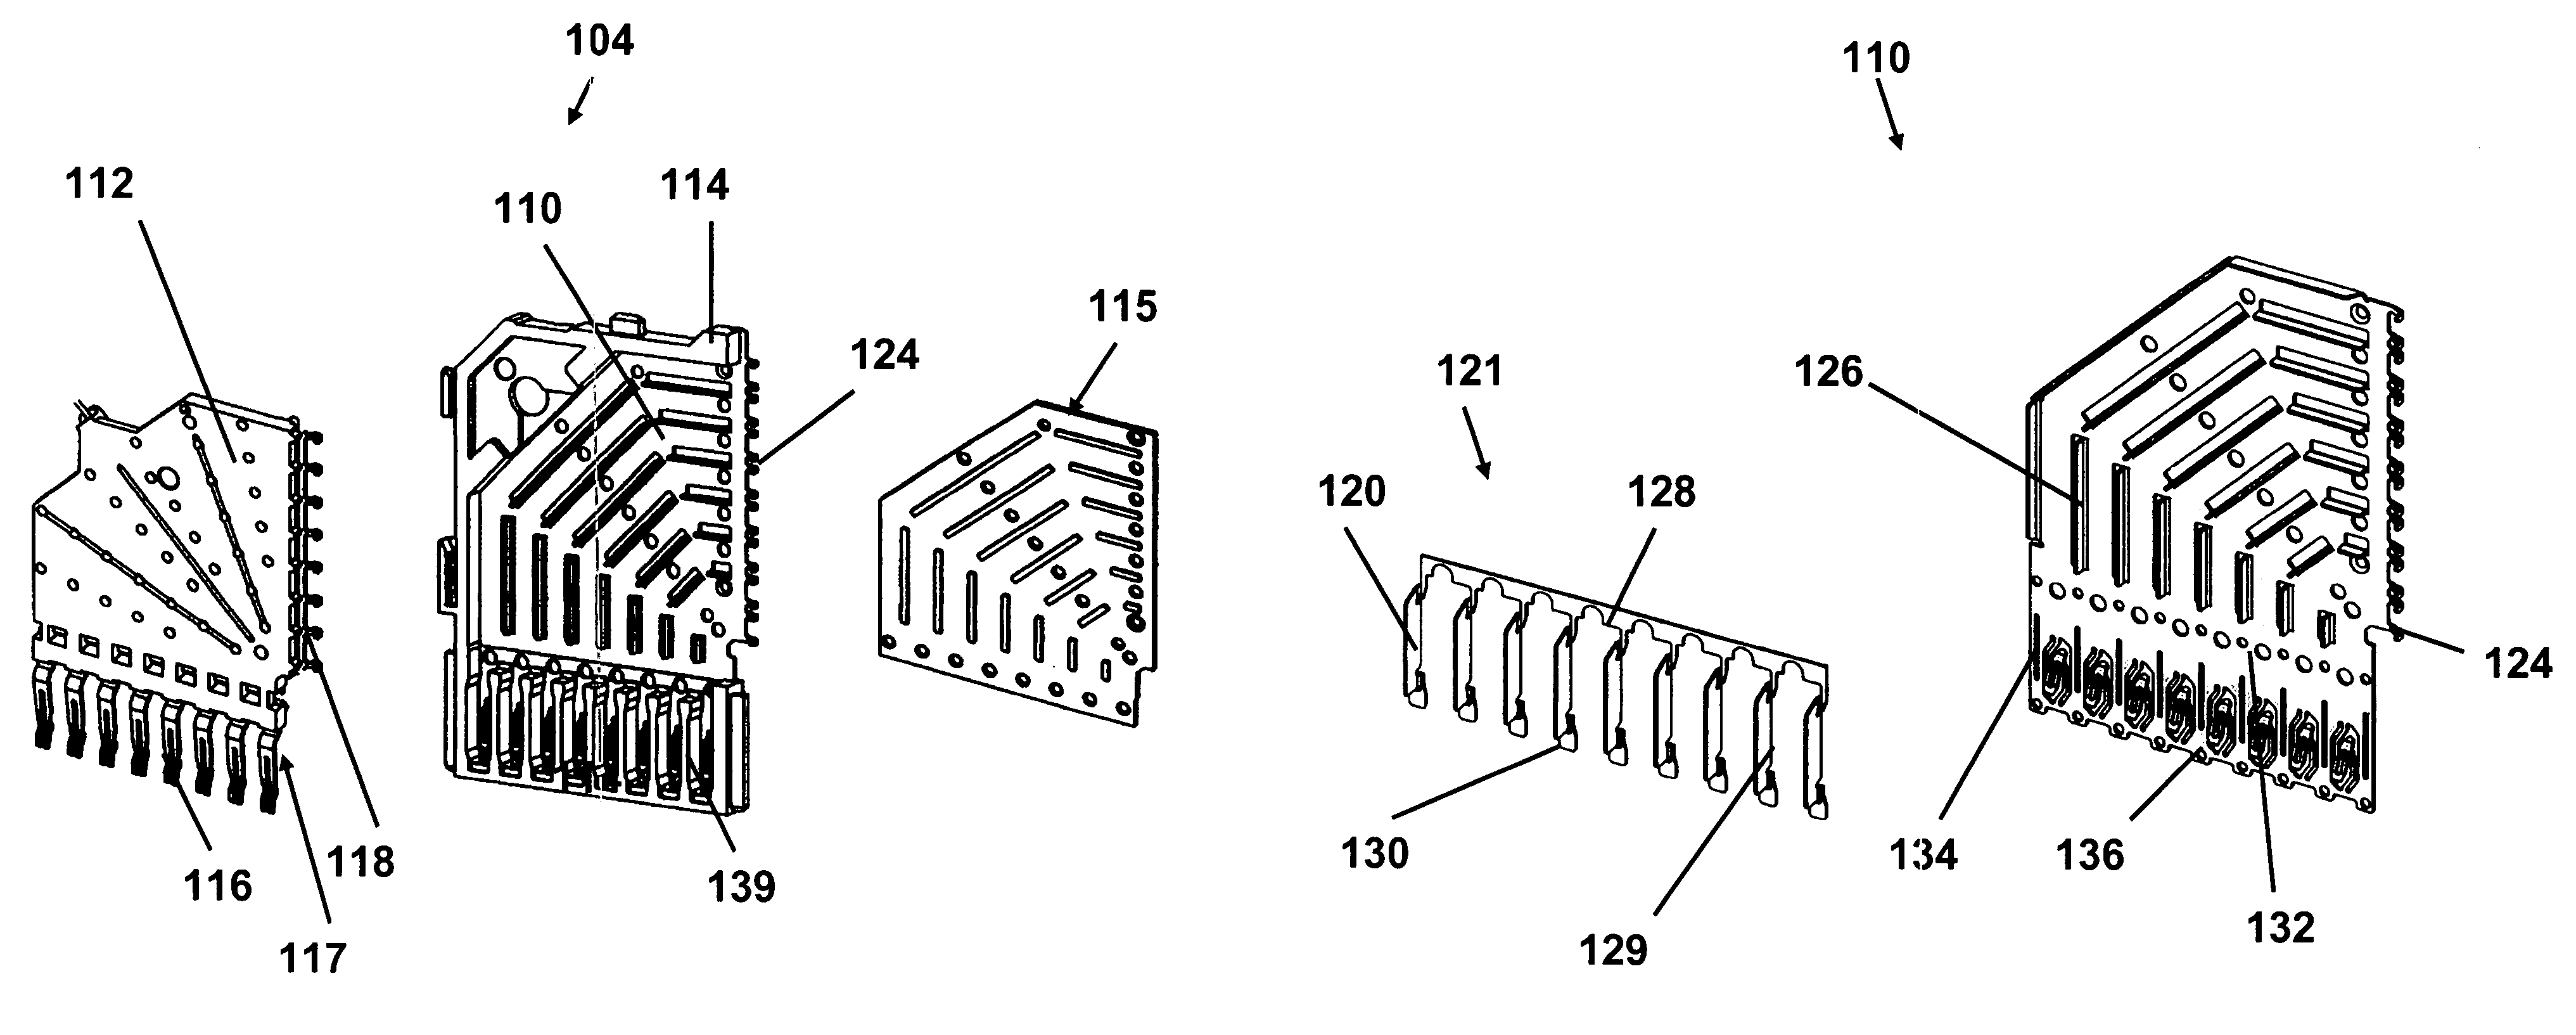 Electrical connector with divider shields to minimize crosstalk